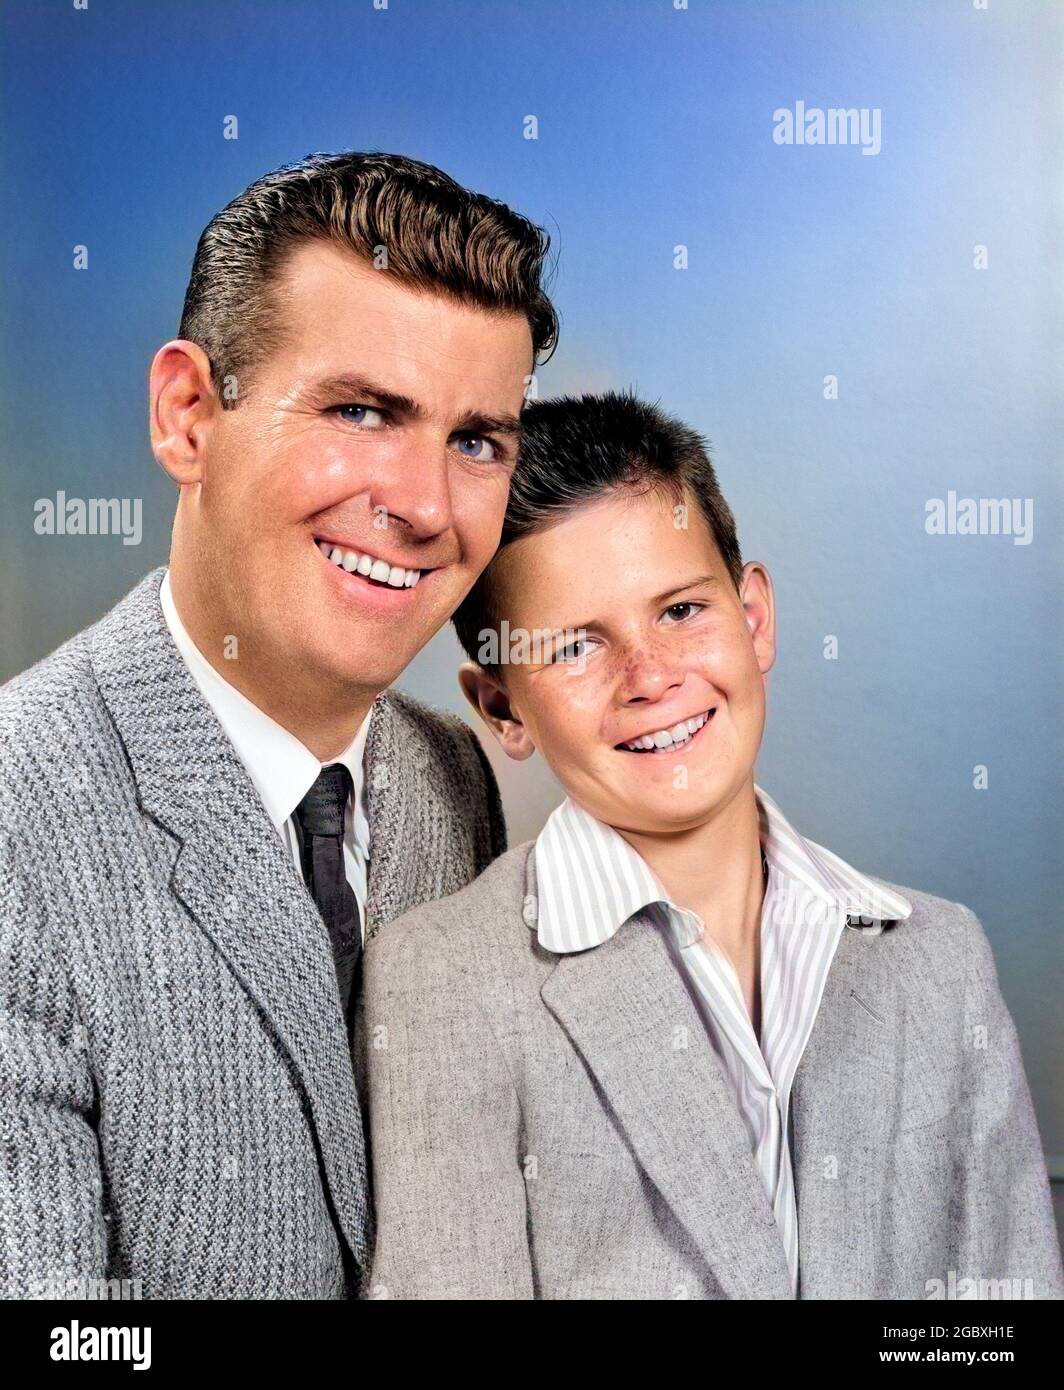 1950s STUDIO PORTRAIT SMILING MAN FATHER AND BOY SON SITTING TOGETHER LOOKING AT CAMERA - j6780c HAR001 HARS JOY STUDIO SHOT GROWNUP PEOPLE CHILDREN HALF-LENGTH PERSONS GROWN-UP CARING MALES EXPRESSIONS FATHERS EYE CONTACT FATHERHOOD SUIT AND TIE CHEERFUL AND DADS SMILES SPORTS JACKET JOYFUL PERSONAL ATTACHMENT SPORTS JACKETS AFFECTION EMOTION JUVENILES MID-ADULT MID-ADULT MAN PARENTHOOD YOUNGSTER CAUCASIAN ETHNICITY HAR001 OLD FASHIONED Stock Photo